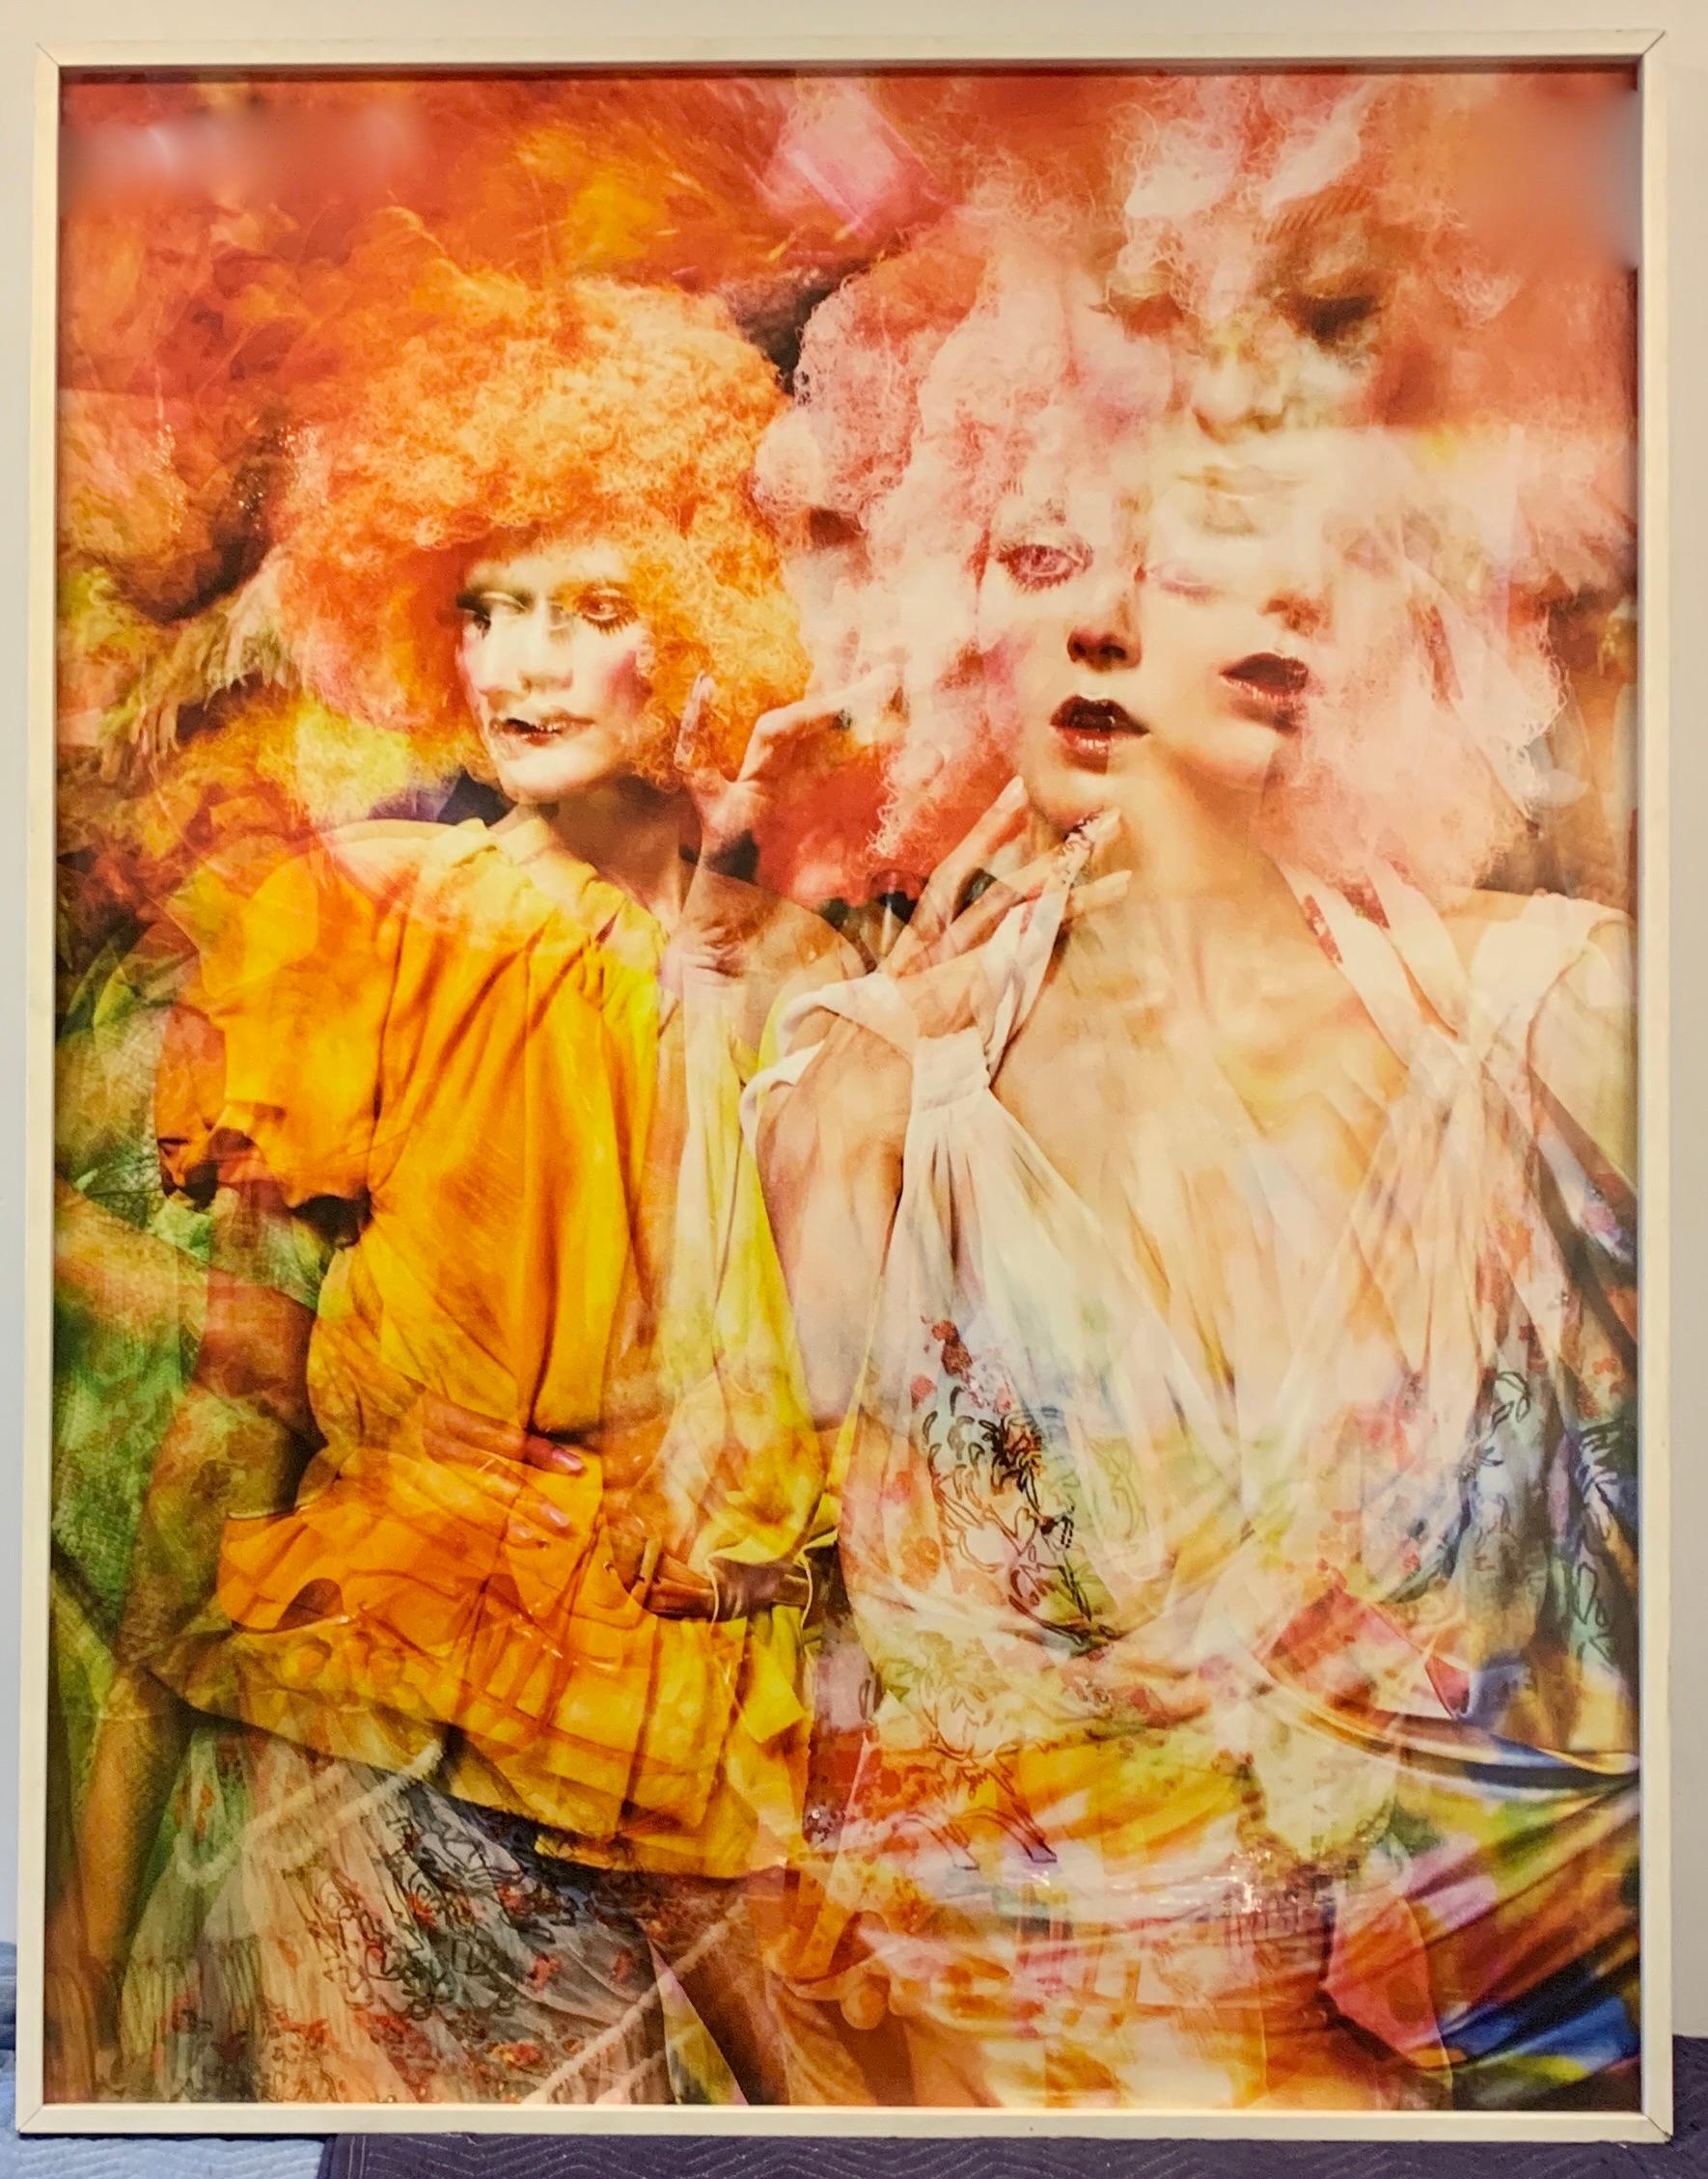 Capturing the colorful mood of models about to take to the runway in Paris, a color photograph of models backstage shot by Celebrity Photographer and Director, Mark Leibowitz. 

A complement to any wall at all! Large scale print in modern white